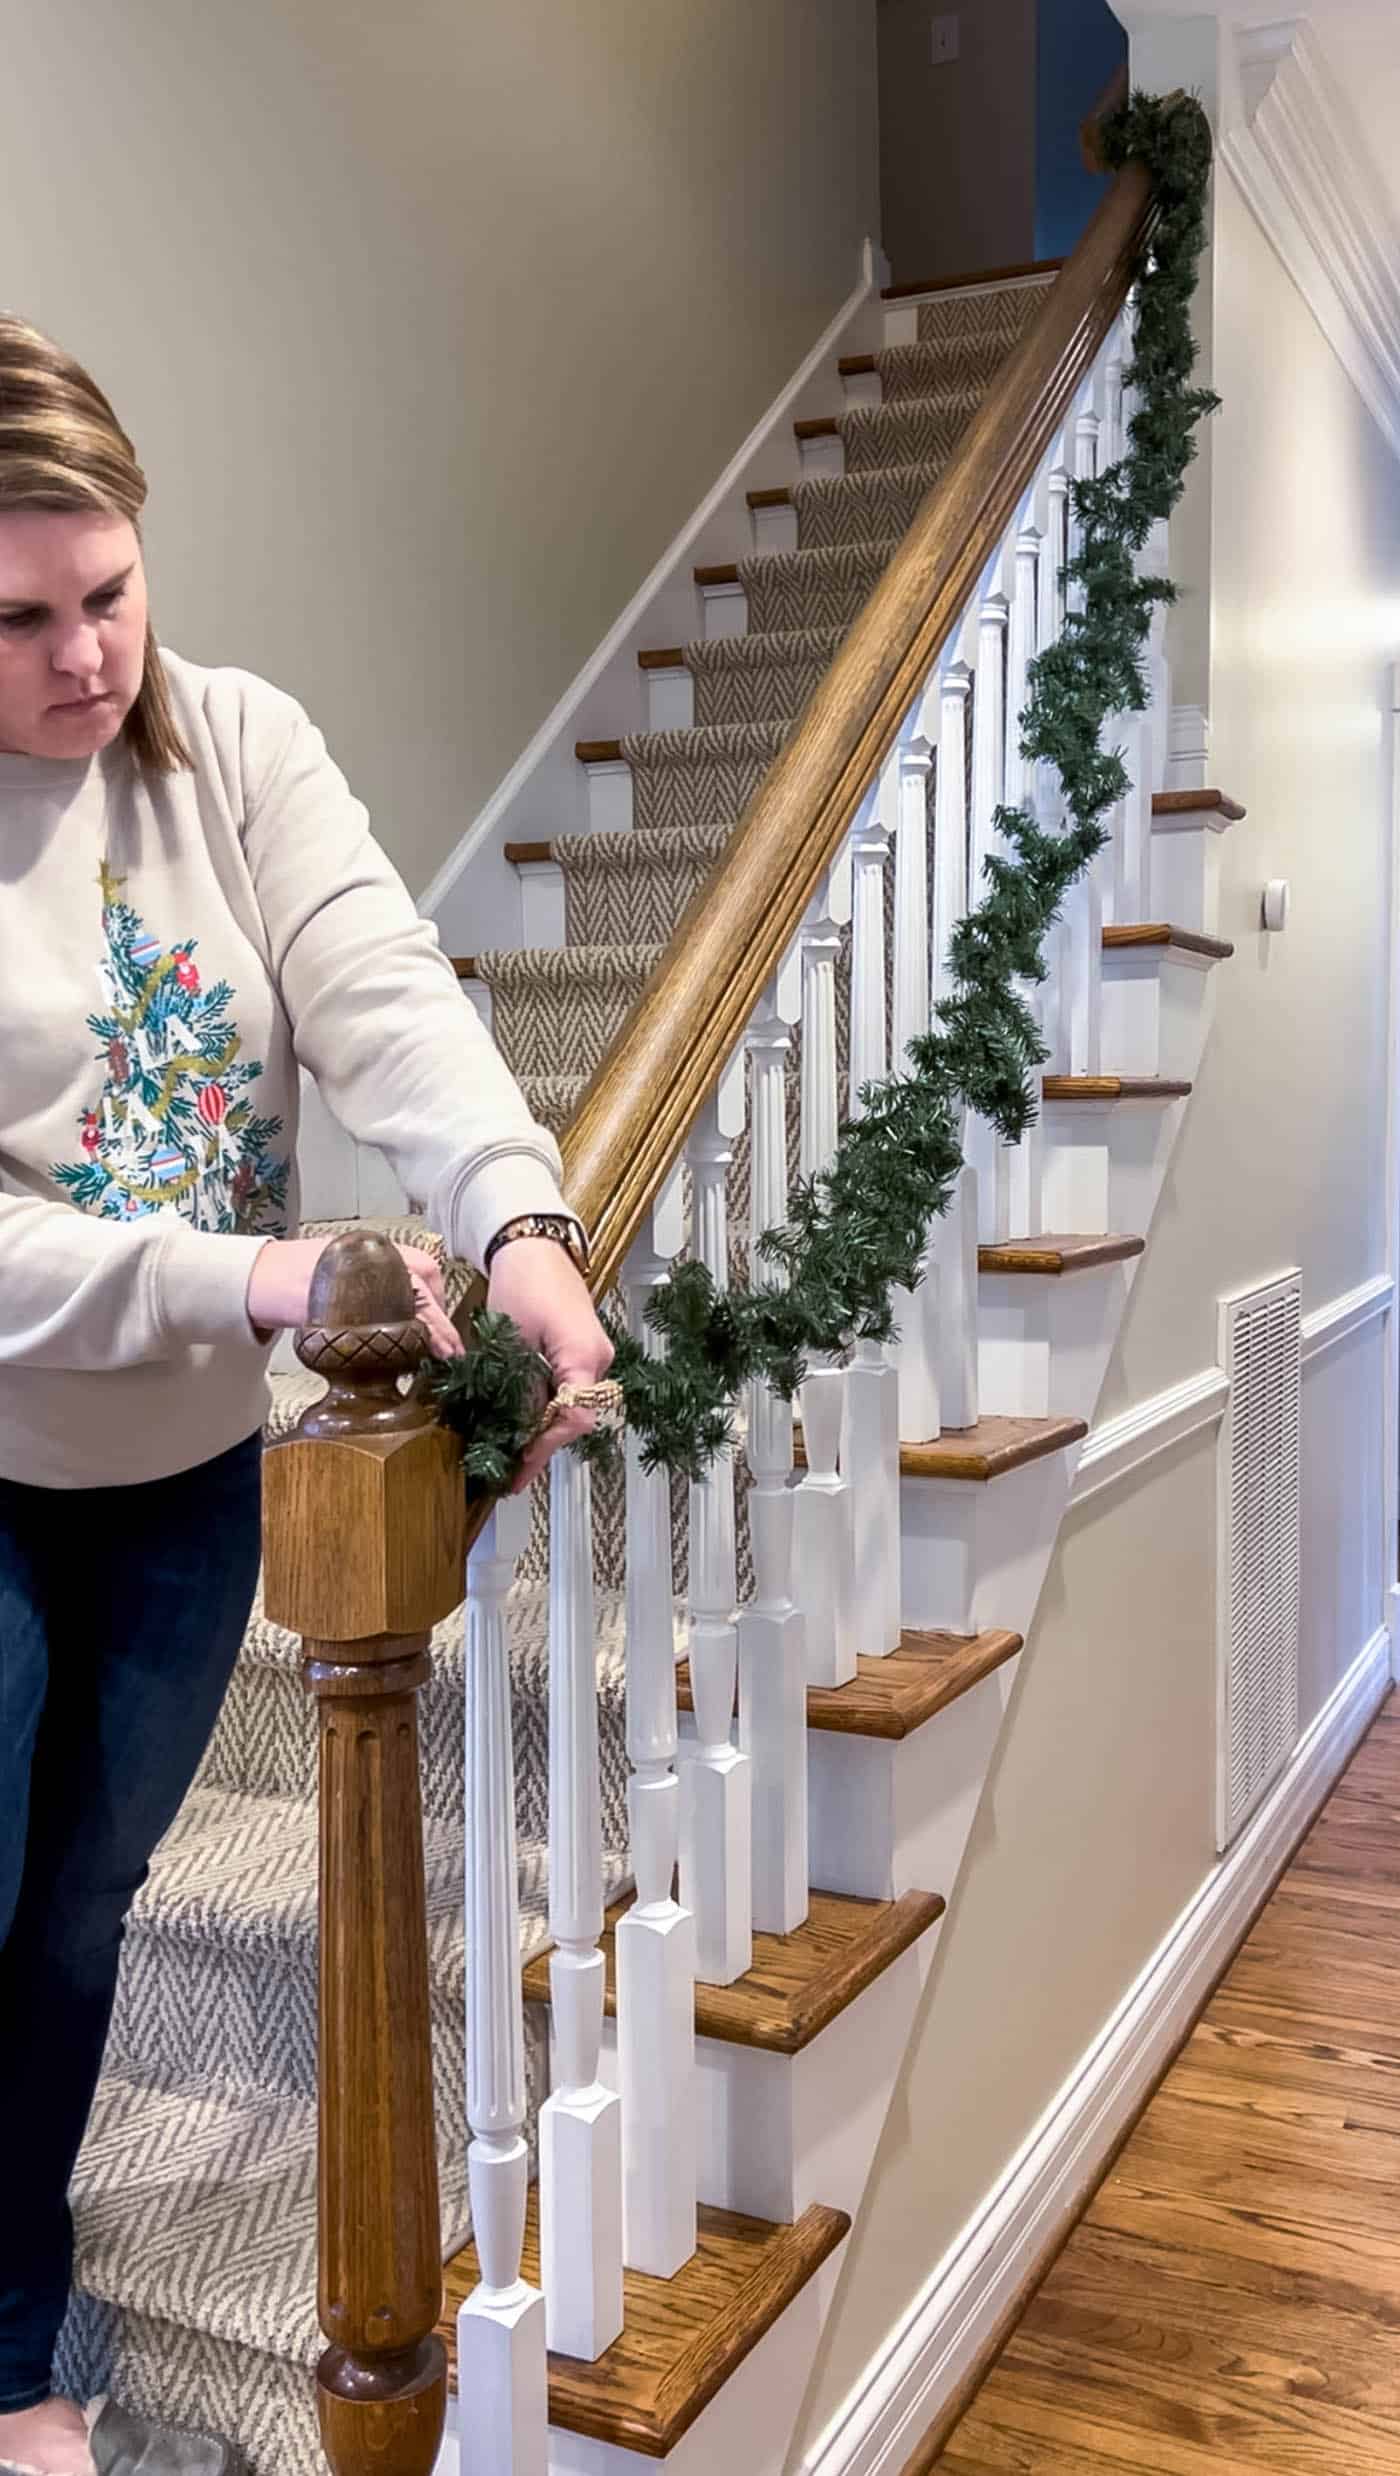 Hang the first garland on the stairs